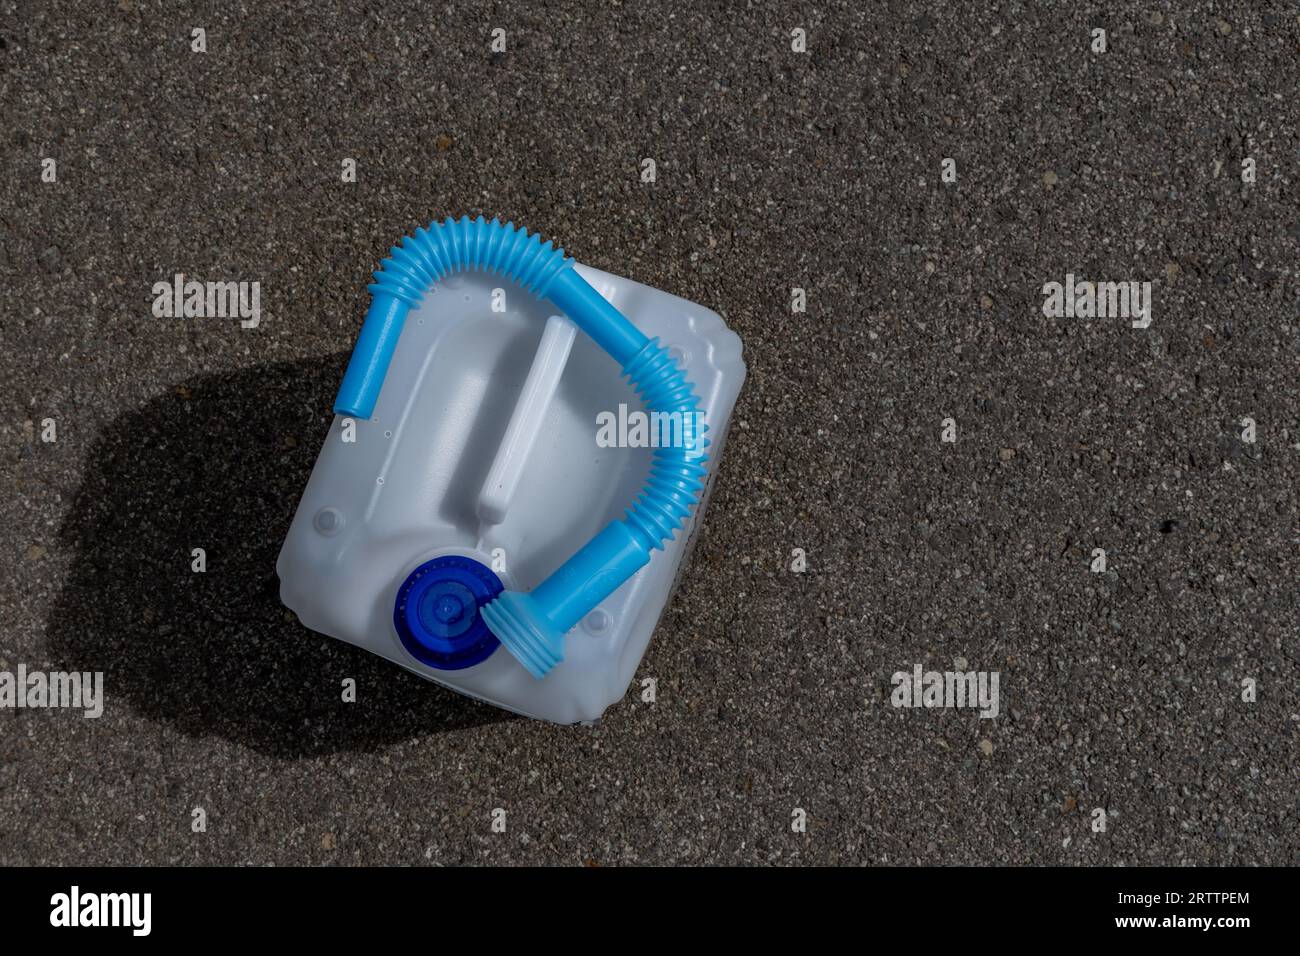 Adblue water fuel canister with funnel in car Stock Photo